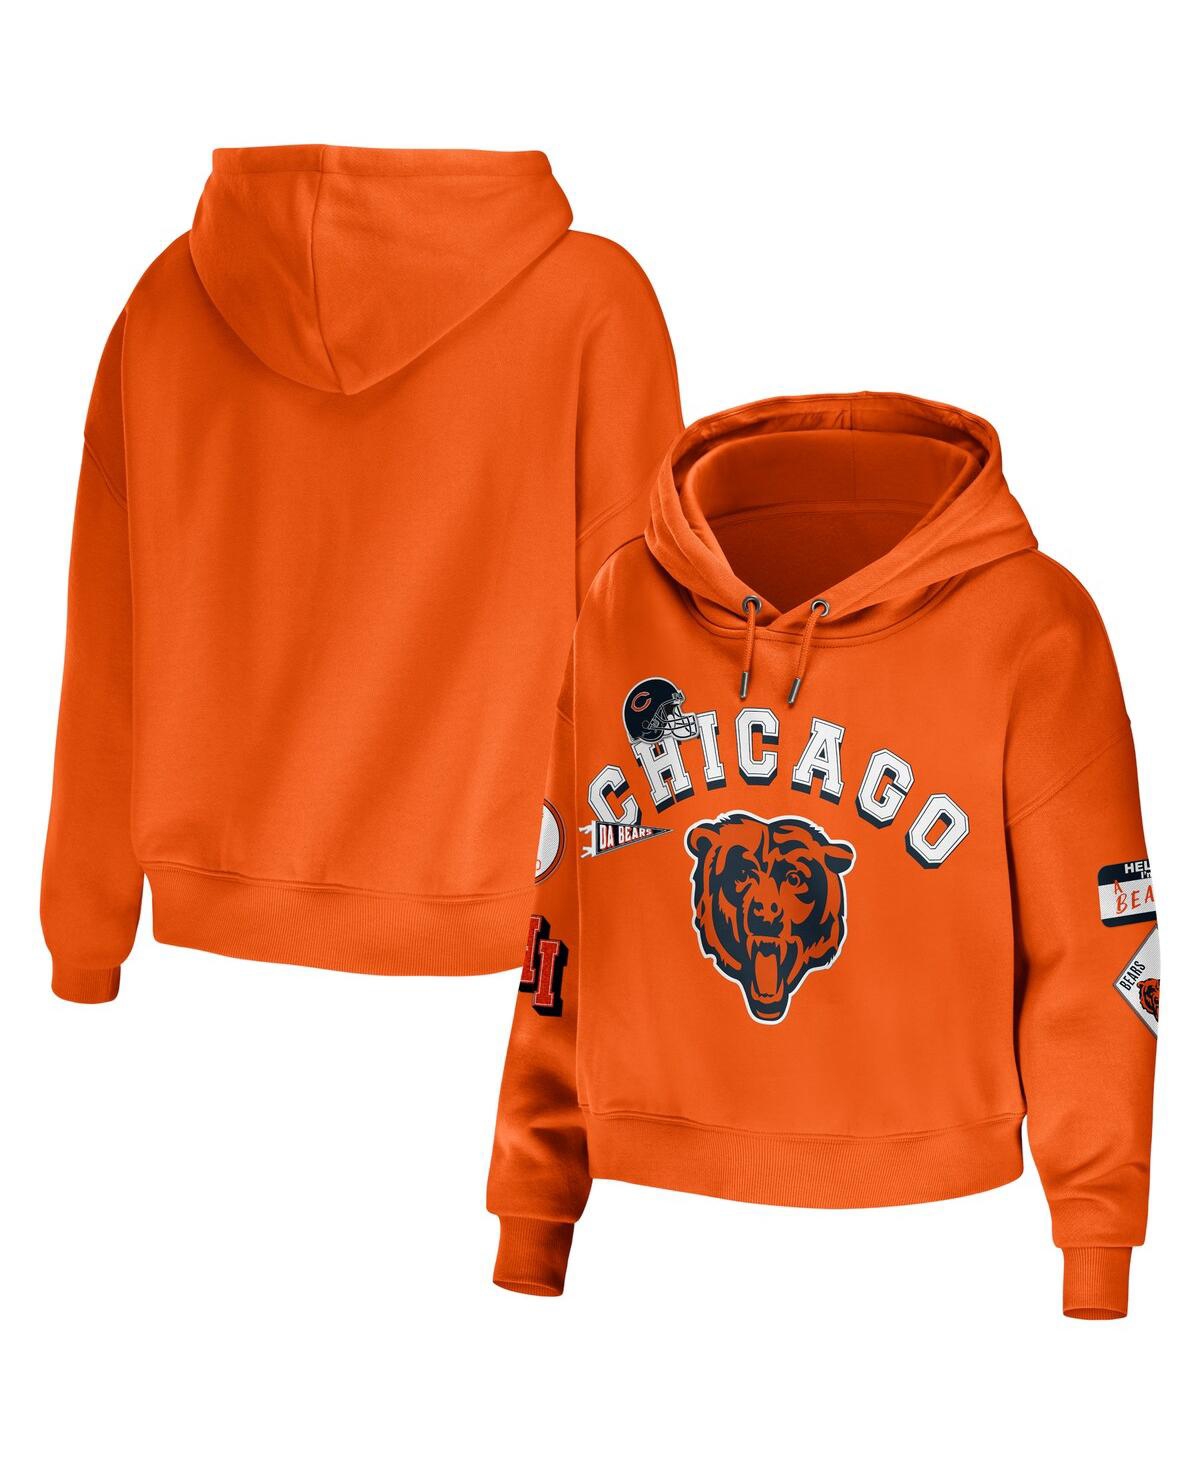 WEAR BY ERIN ANDREWS WOMEN'S WEAR BY ERIN ANDREWS ORANGE CHICAGO BEARS PLUS SIZE MODEST CROPPED PULLOVER HOODIE